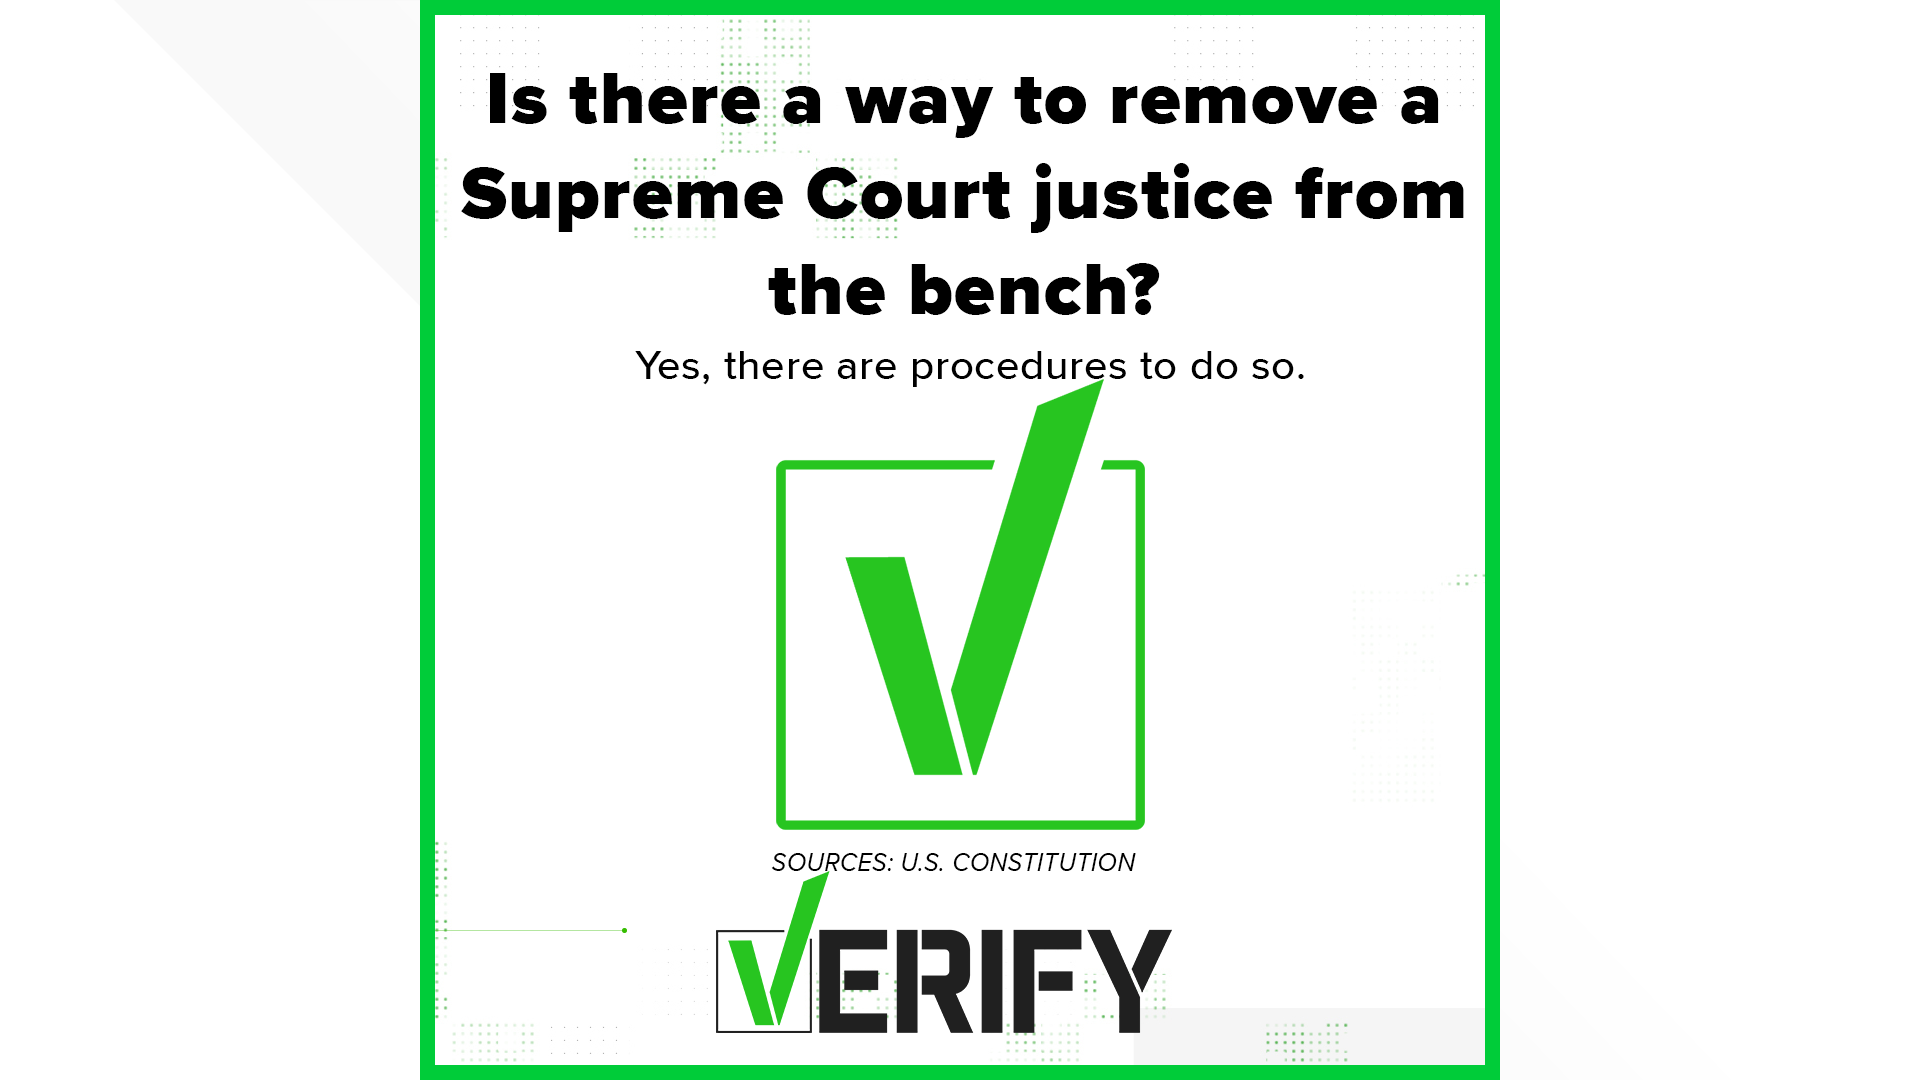 We verified three things about what can and cannot happen around Judge Barrett's potential confirmation to the Supreme Court.